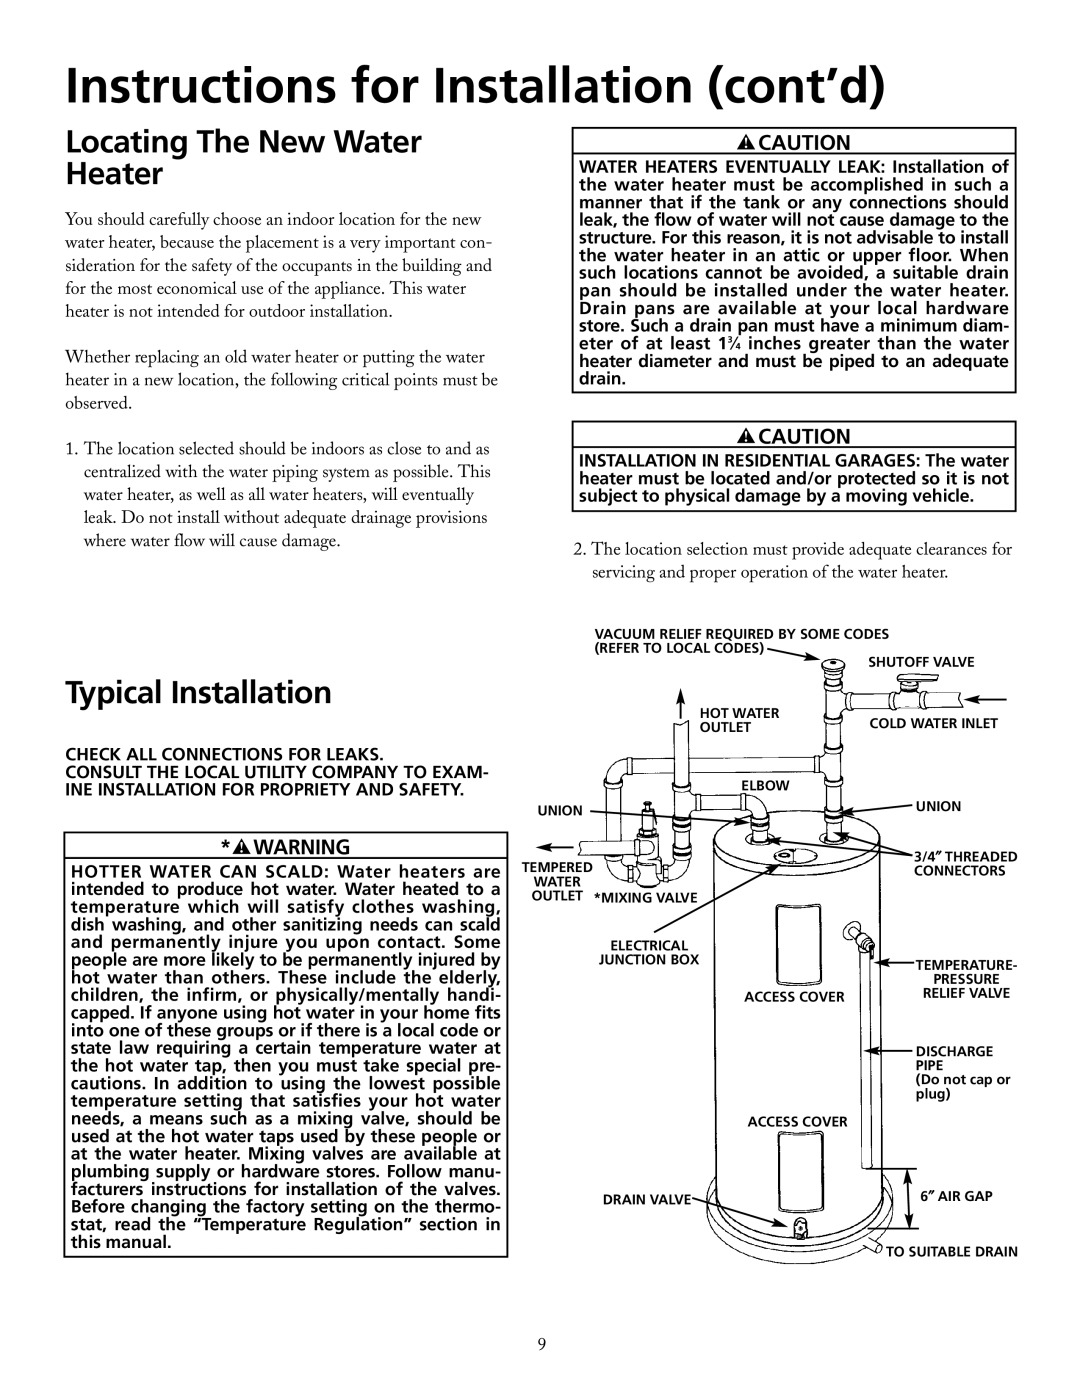 Maytag HRX66DERT, HRX30DERT manual Instructions for Installation cont’d, Locating The New Water Heater, Typical Installation 